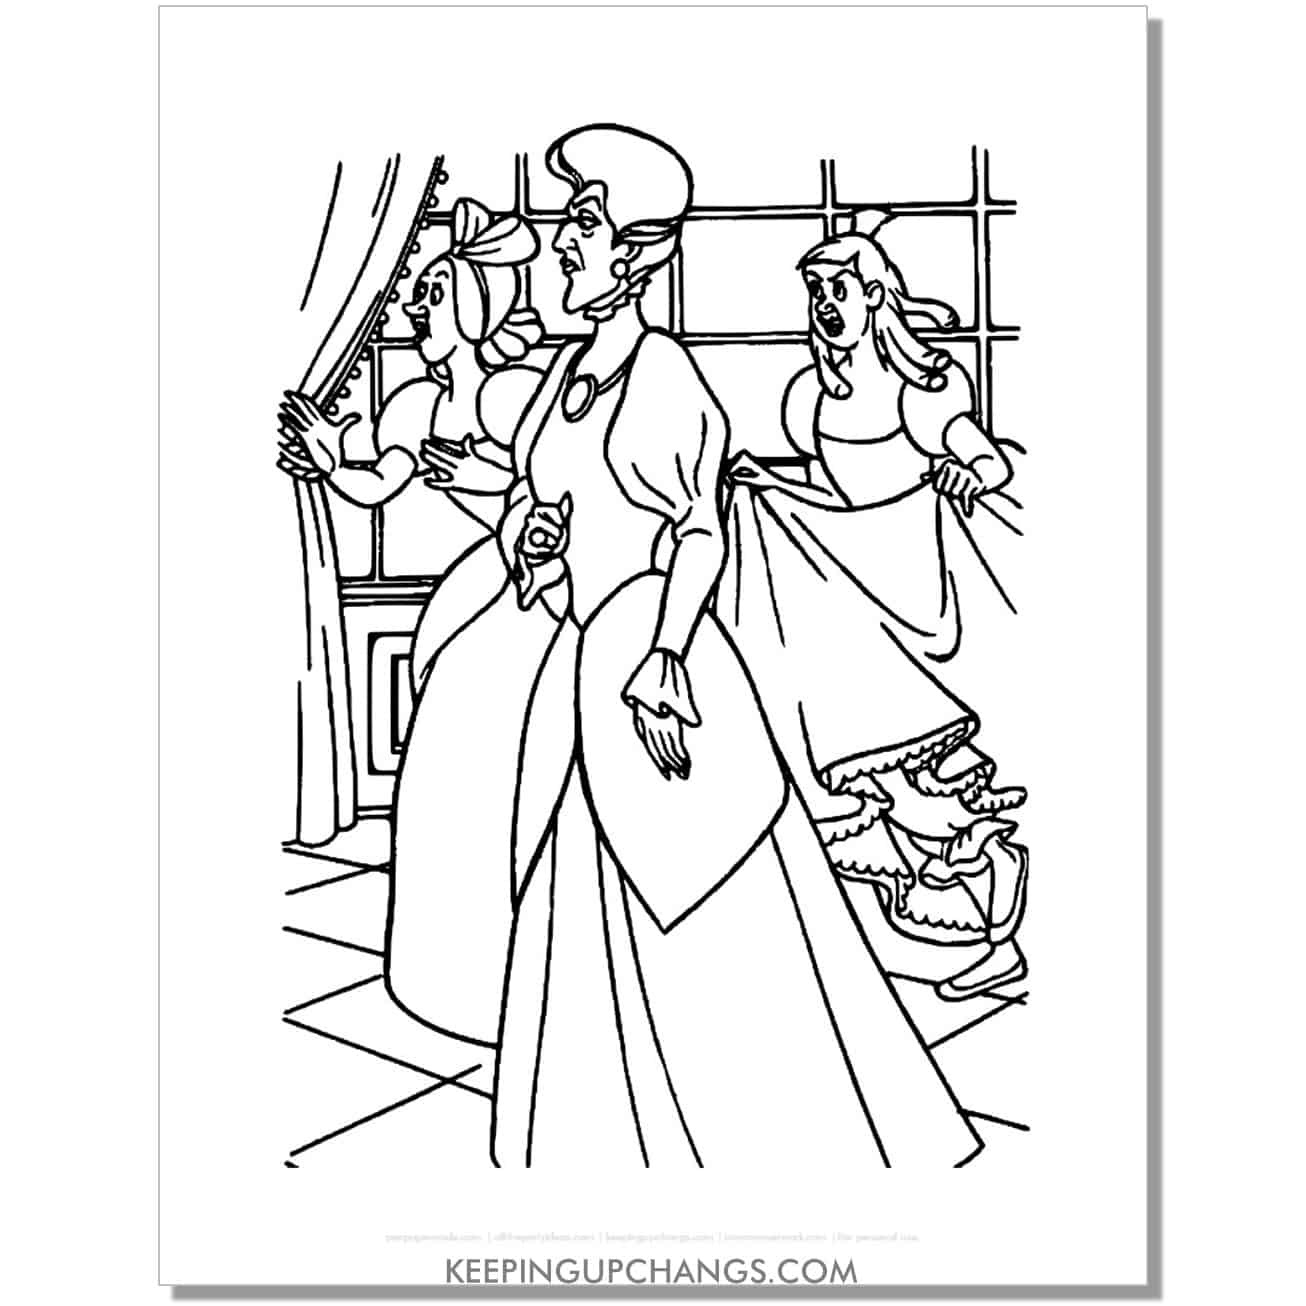 cinderella's evil stepmother and stepsisters coloring page, sheet.